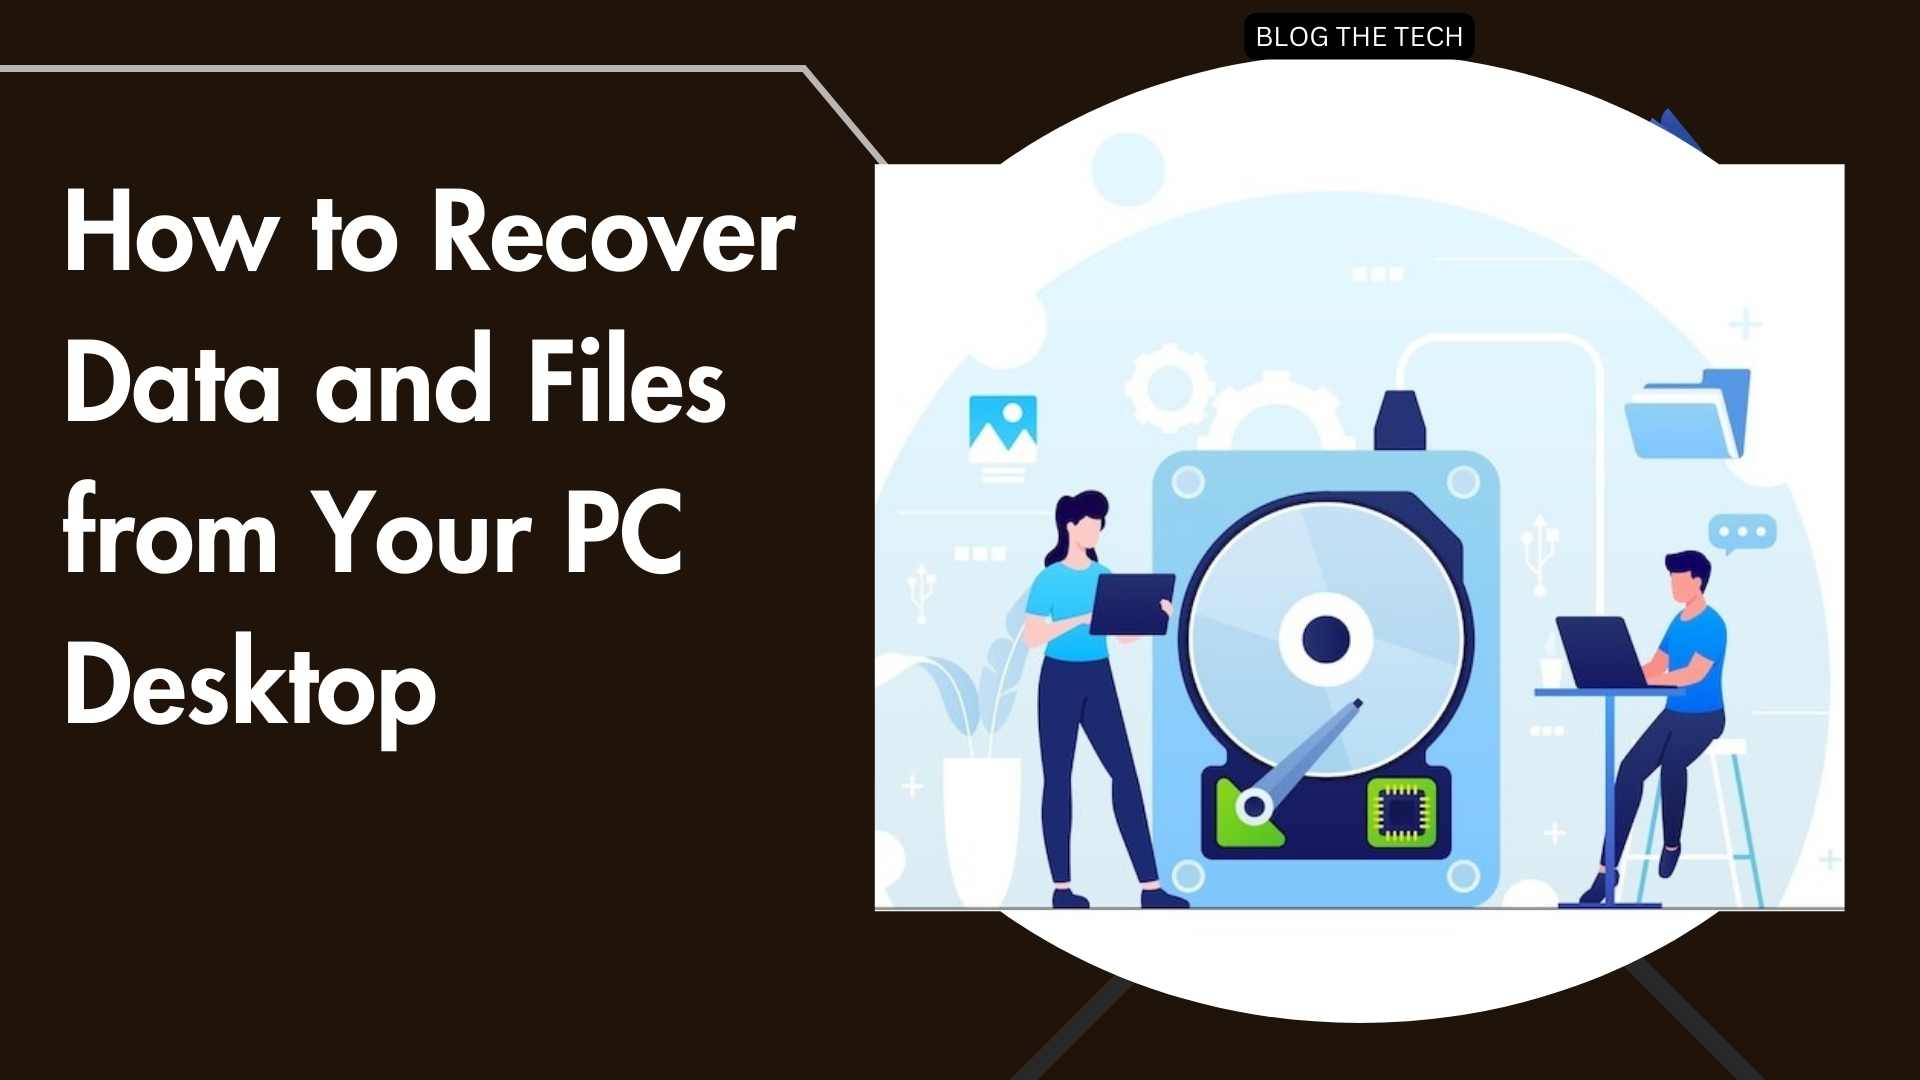 How to Recover Data and Files from Your PC Desktop